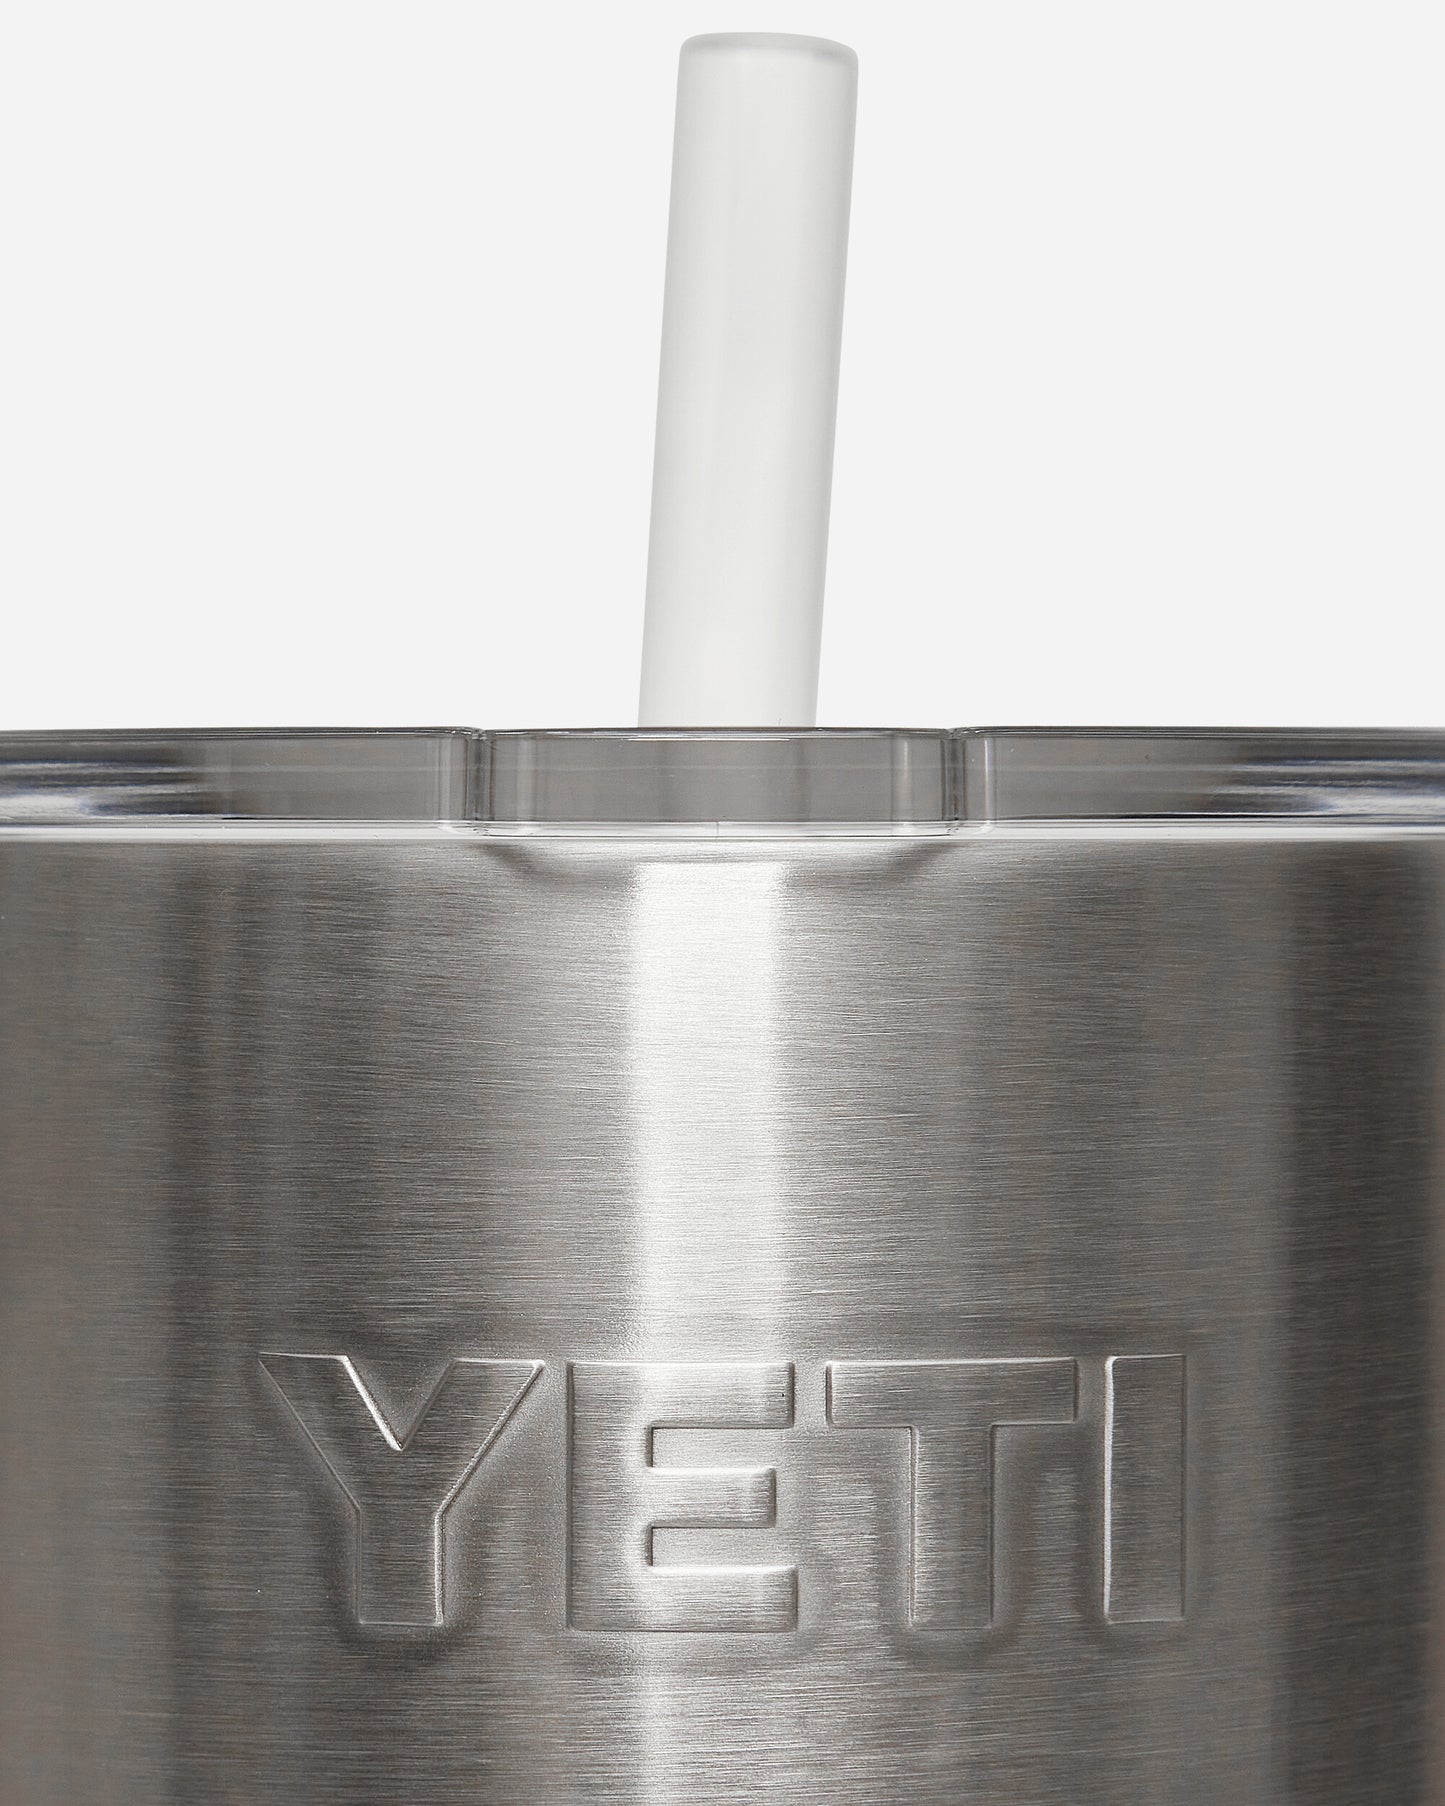 Yeti Rambler Straw Cup STAINLESS STEEL Equipment Bottles and Bowls 0325 STS